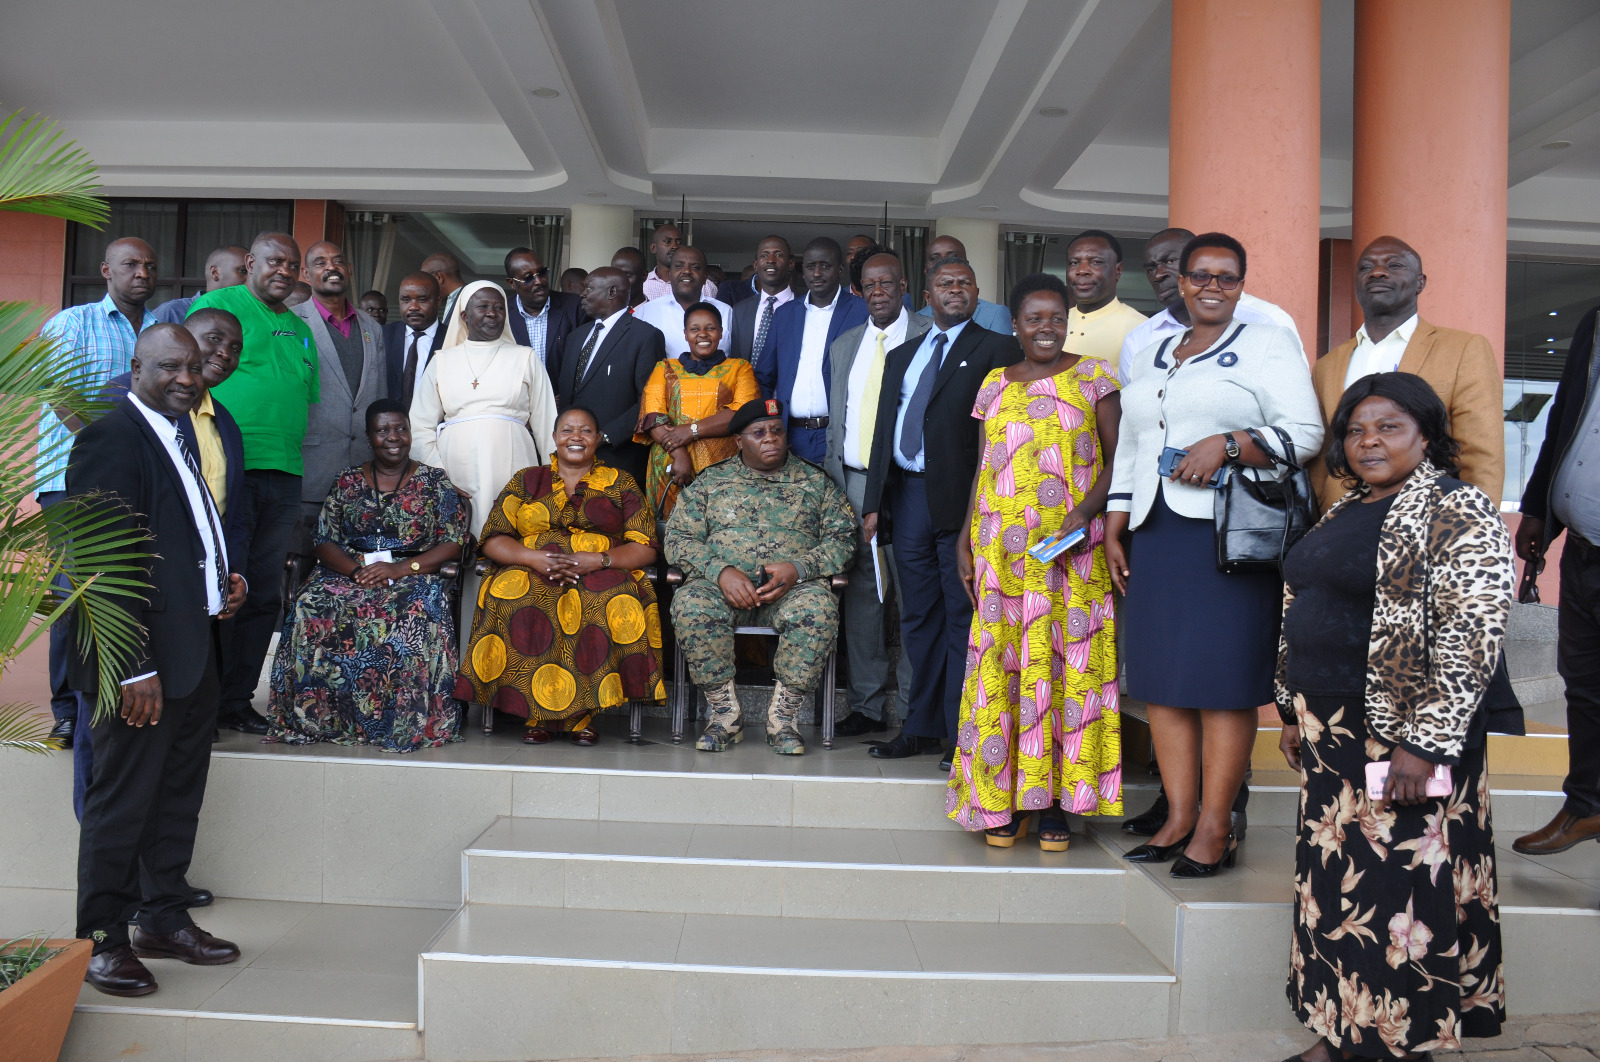 Retreat for Resident District Commissioners, Resident City Commissioners, Deputy Resident District Commissioners and Deputy Resident City Commissioners from Kigezi, Ankole and Rwenzori Sub-Regions